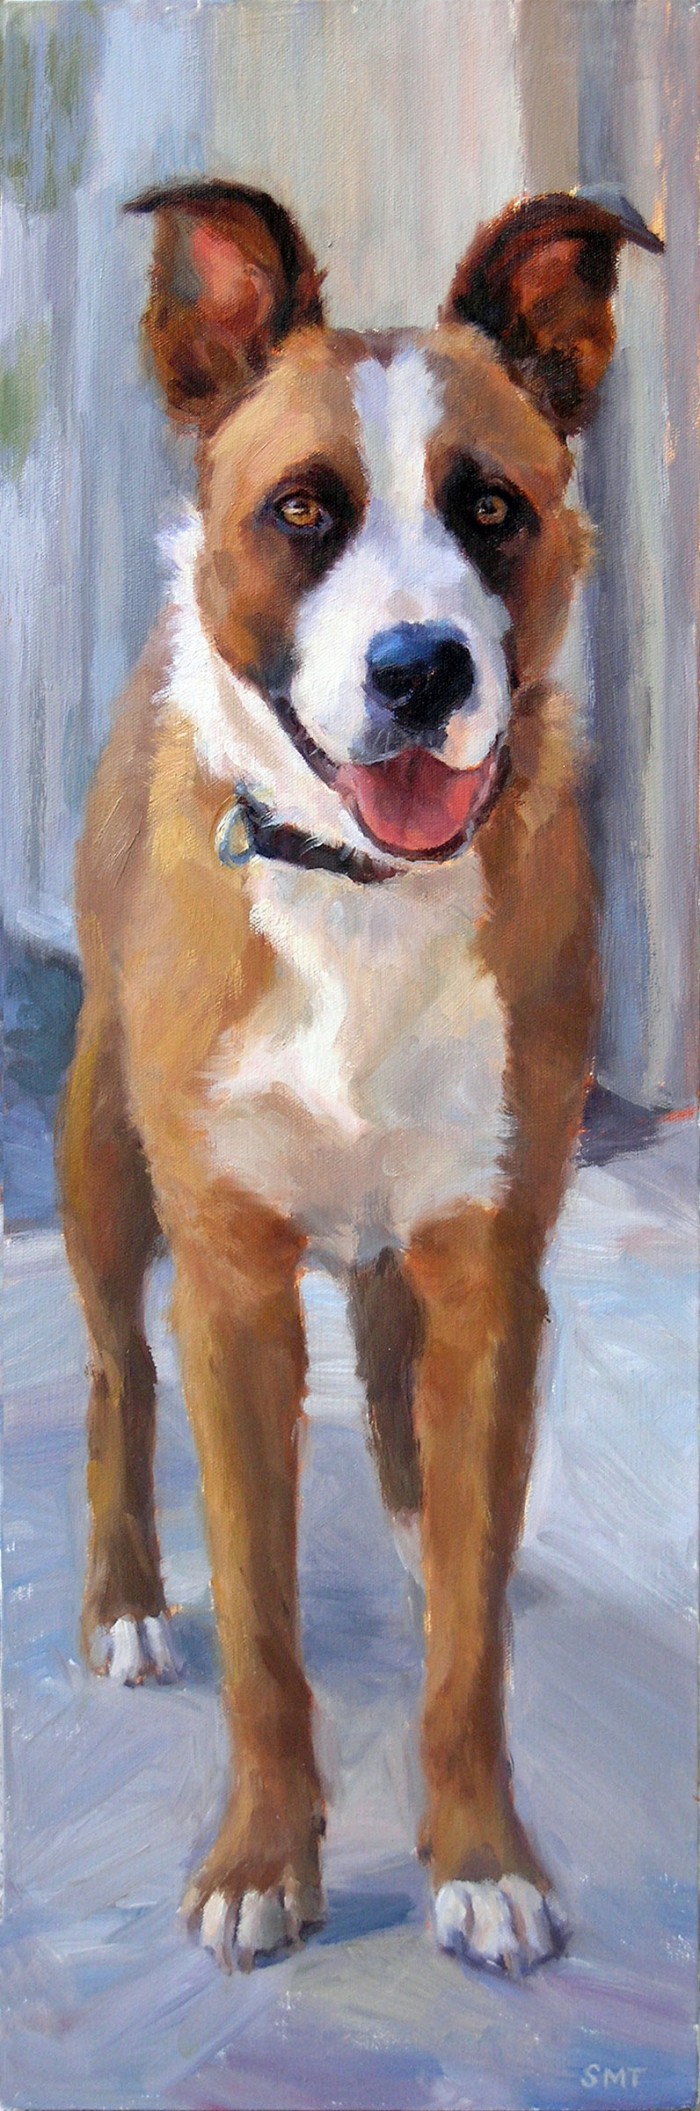 Cubby 10 x 30 inches oil on canvas private collection